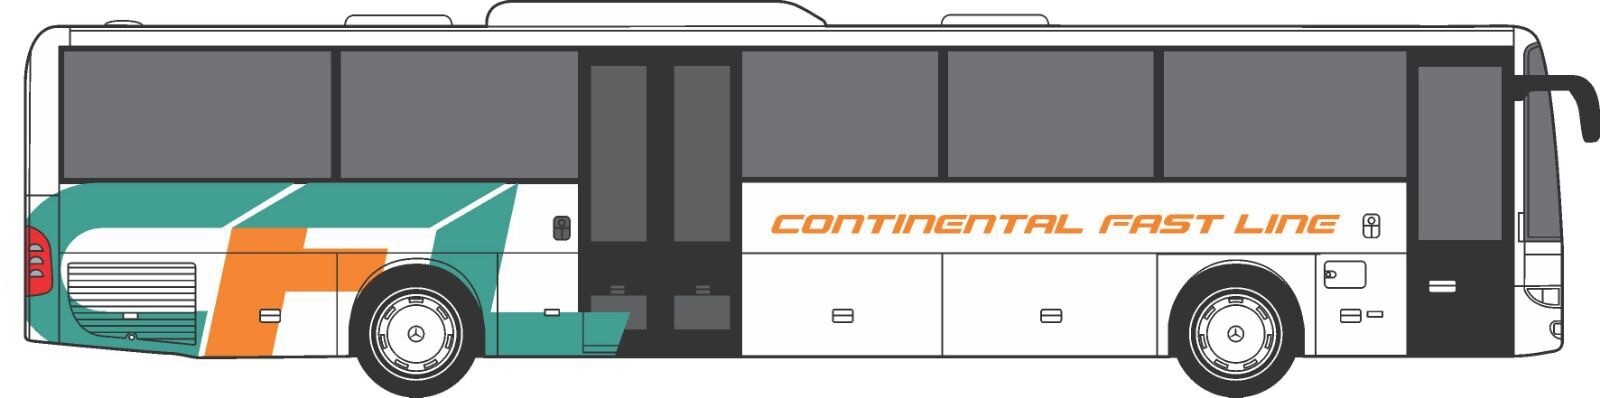 CONTINENTAL FAST LINE S.R.L. undefined: bilde 2